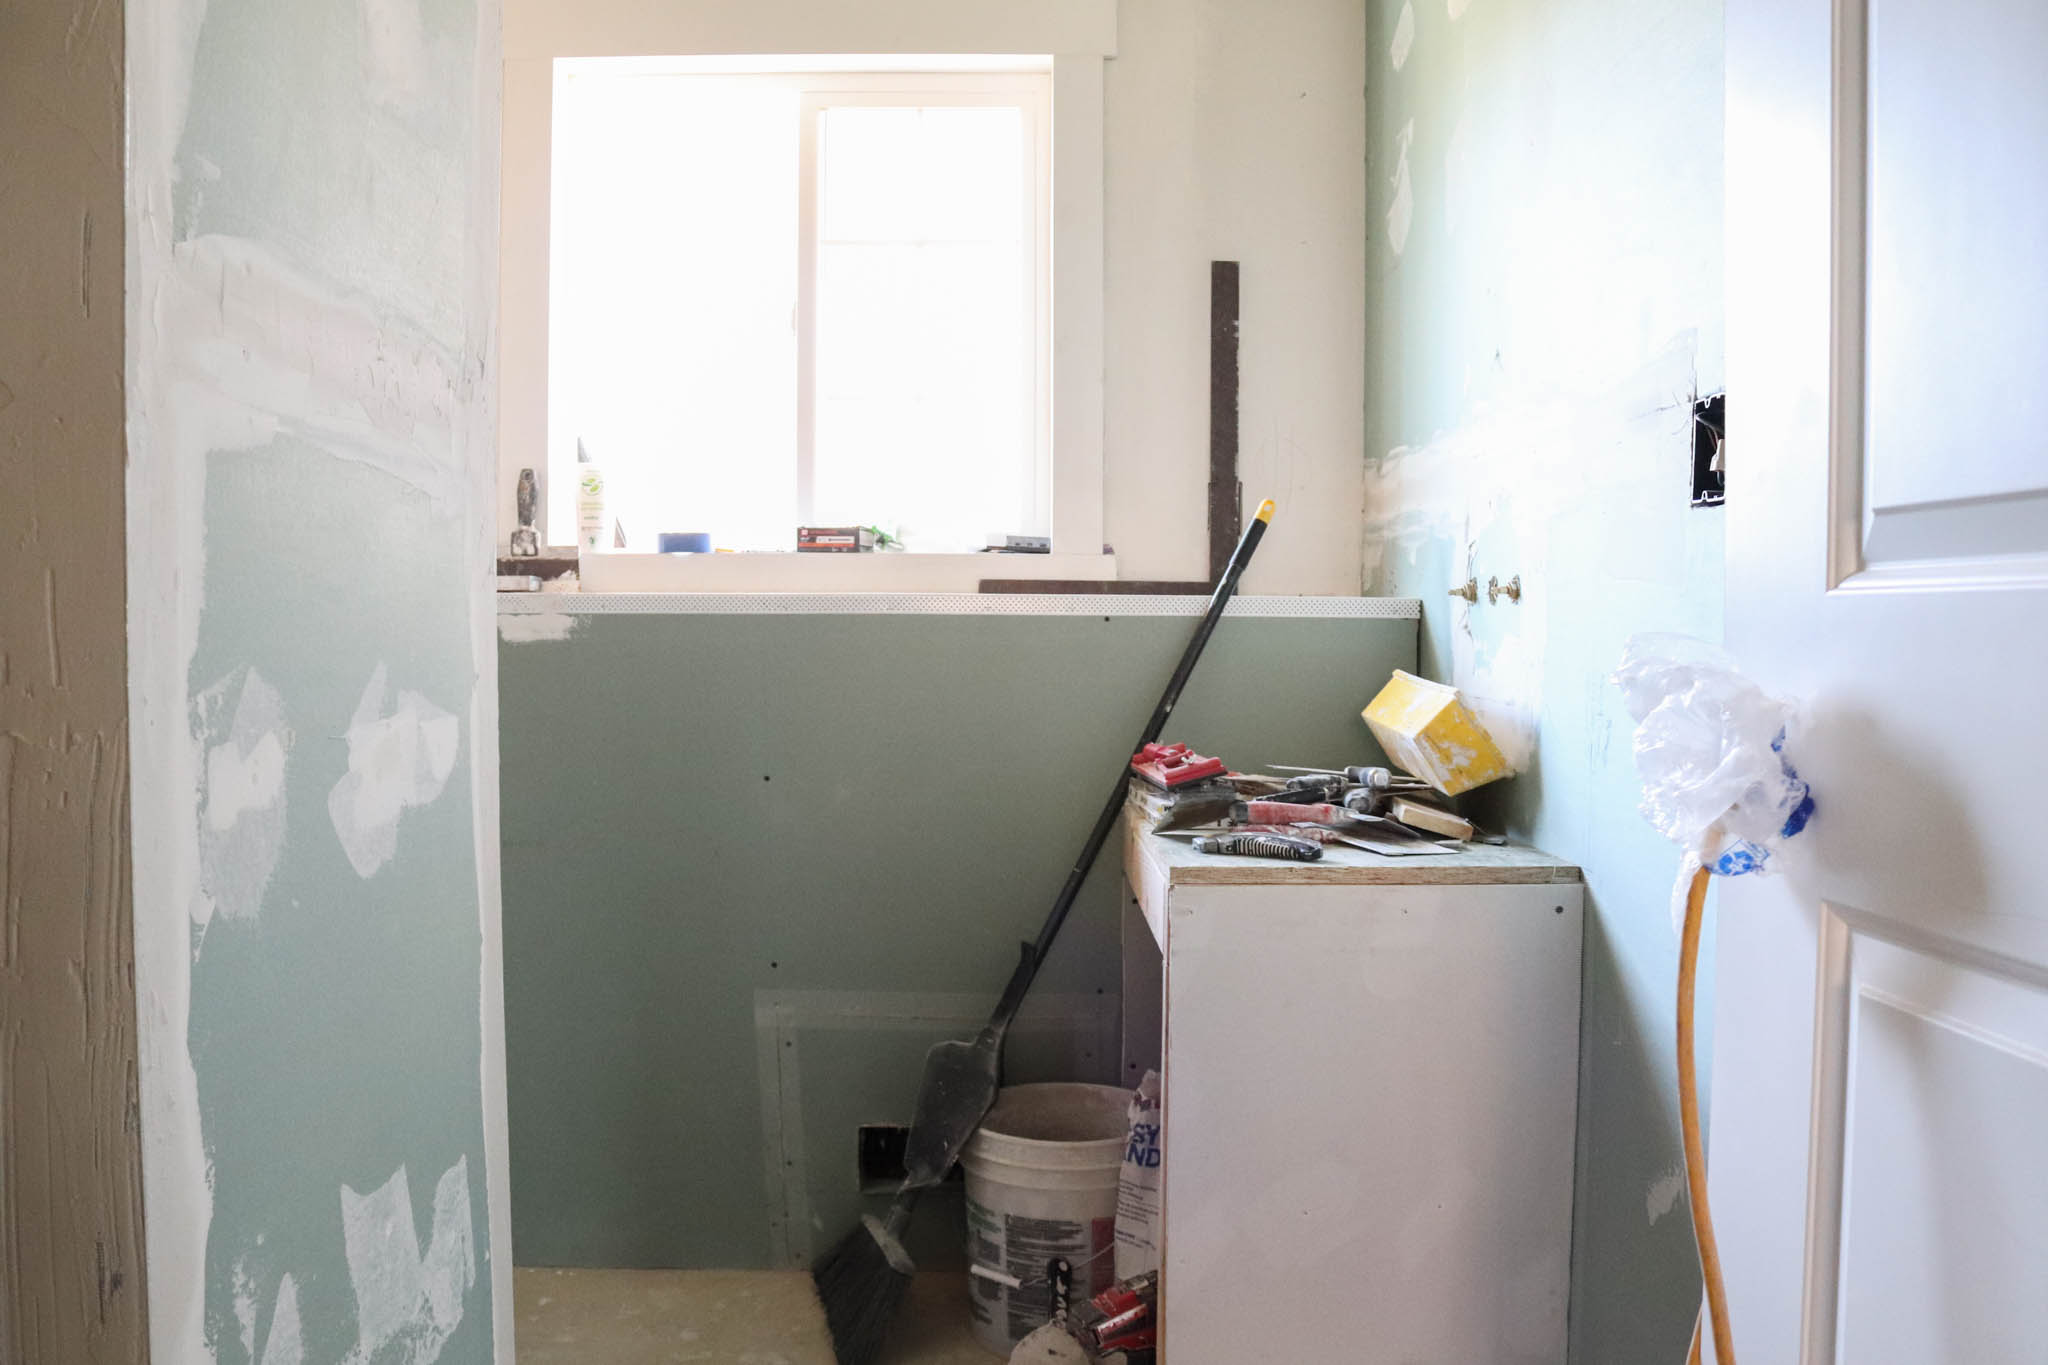 An Update On Our Downstairs Bathroom Remodel